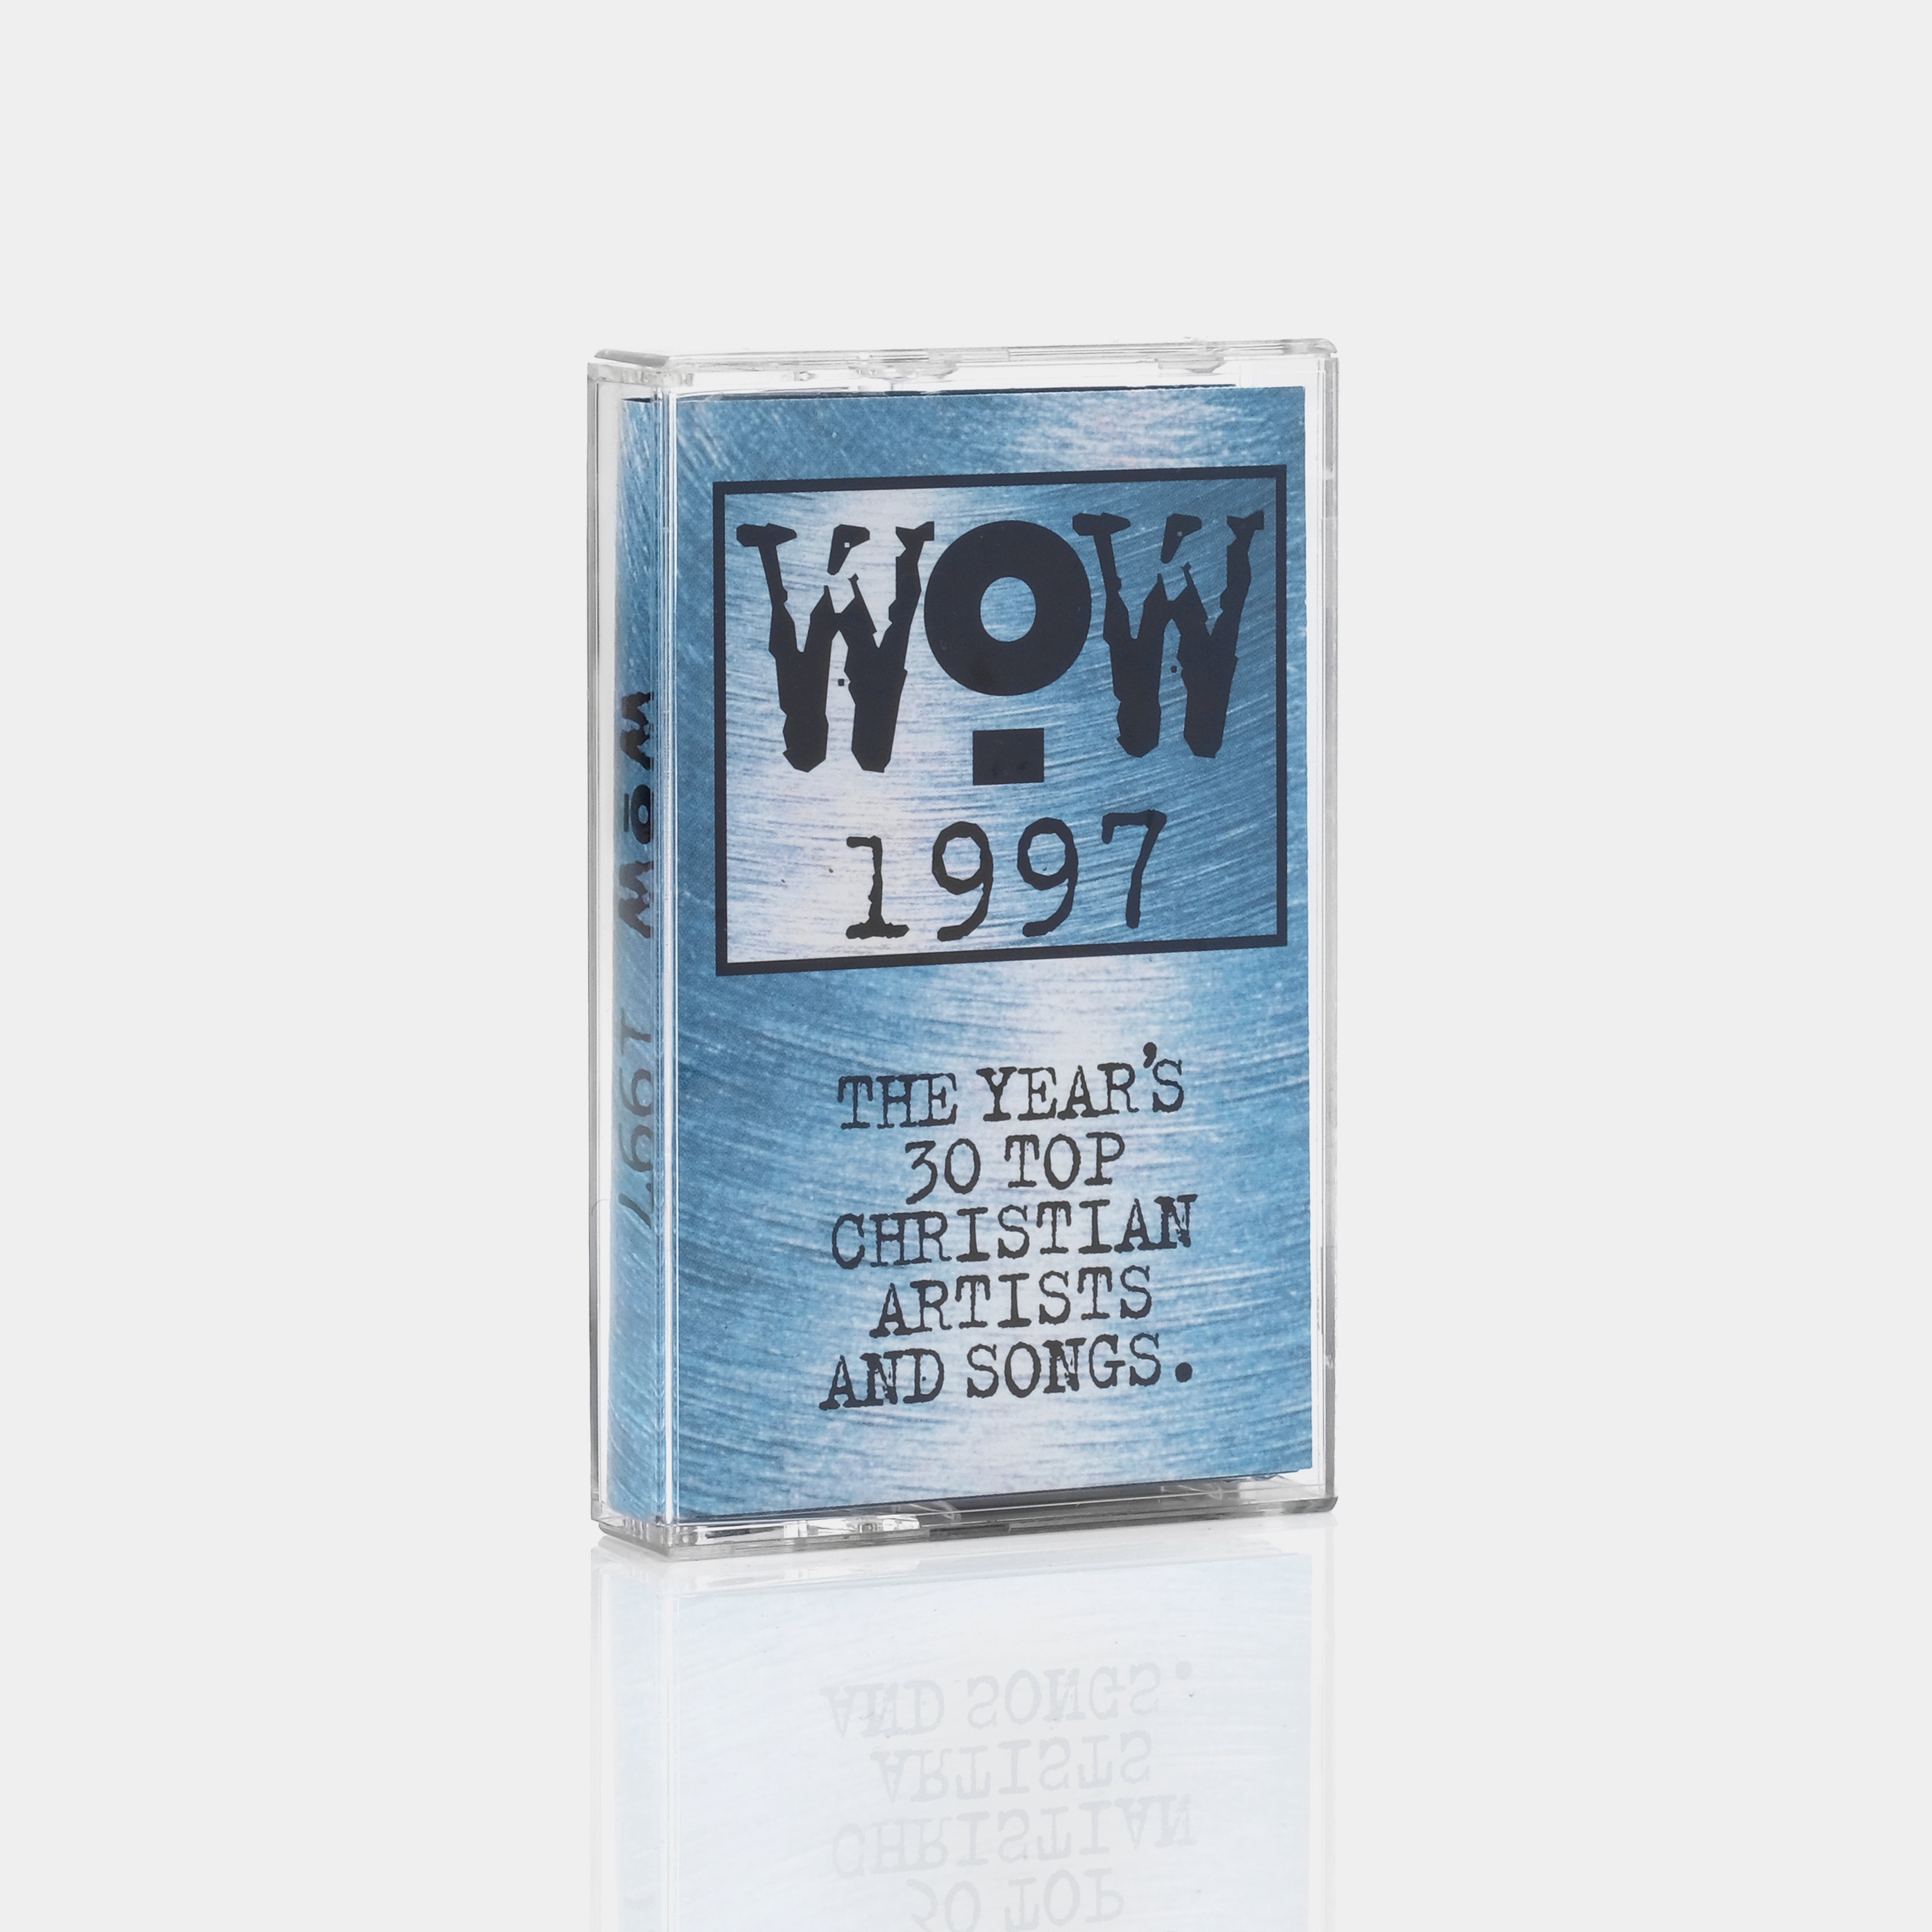 WOW 1997 The Year's 30 Top Christian Artists And Songs Cassette Tape